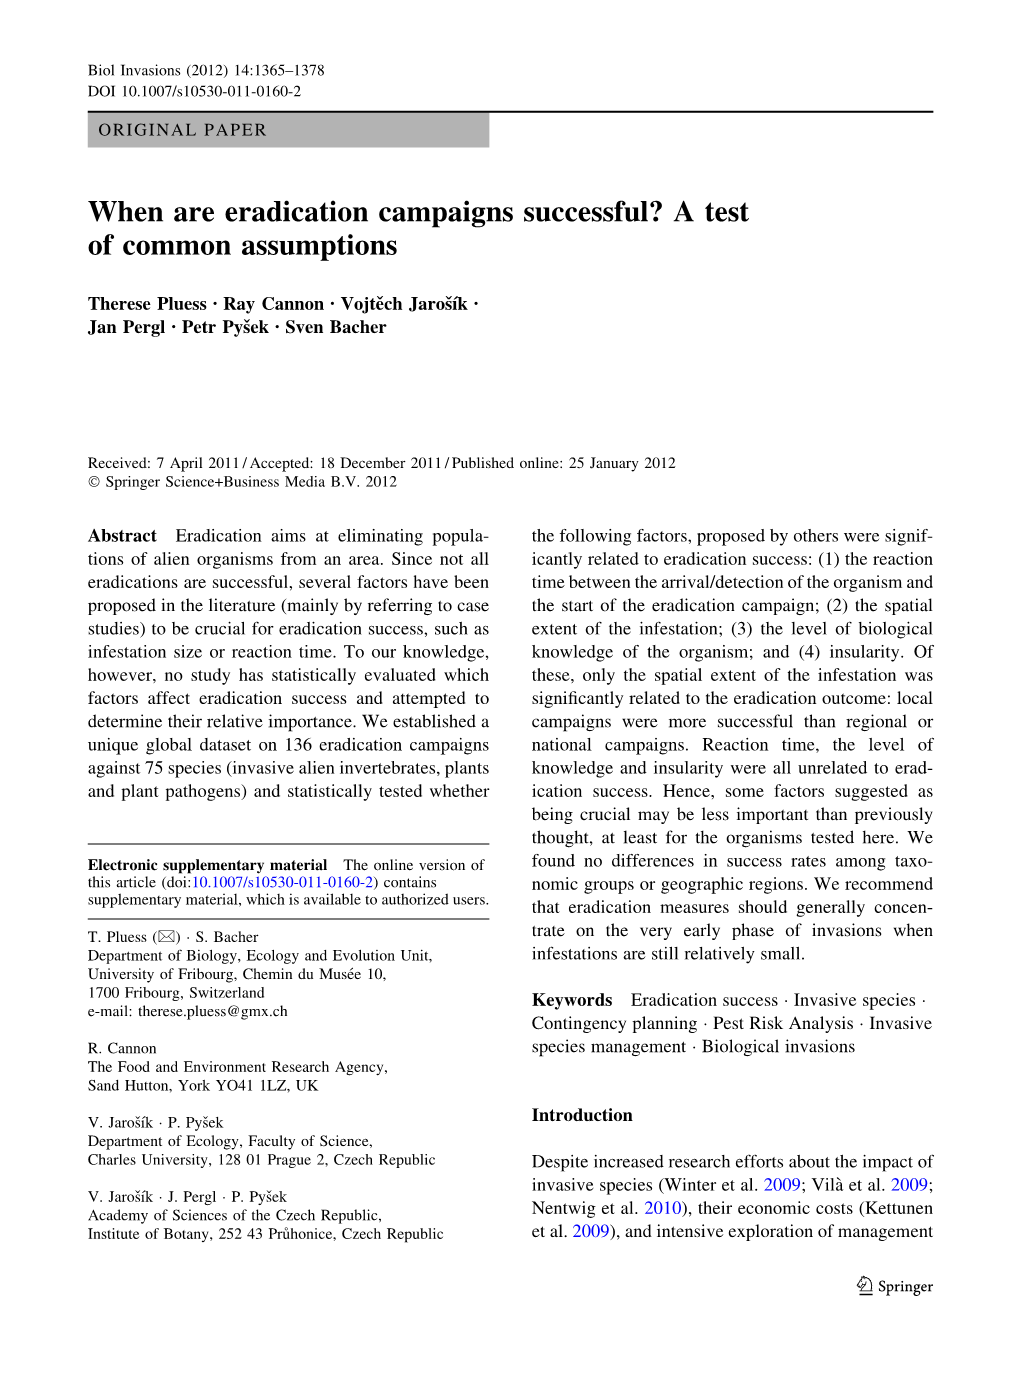 When Are Eradication Campaigns Successful? a Test of Common Assumptions